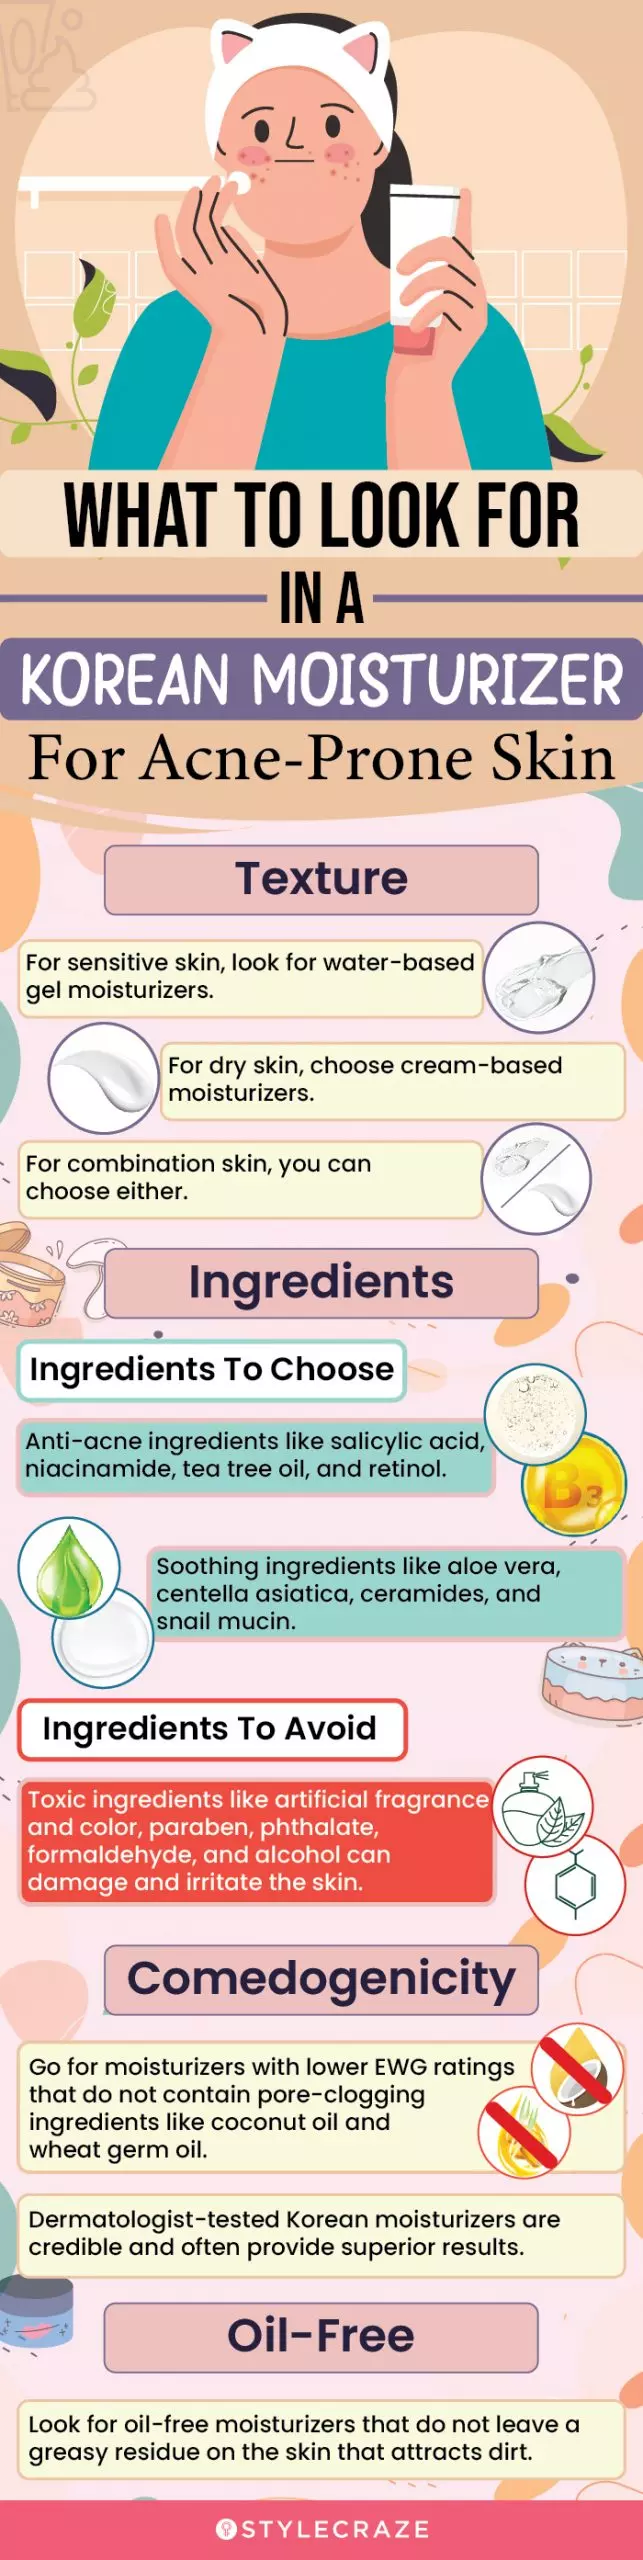 What To Look For In A Korean Moisturizer For Acne-Prone Skin (infographic)